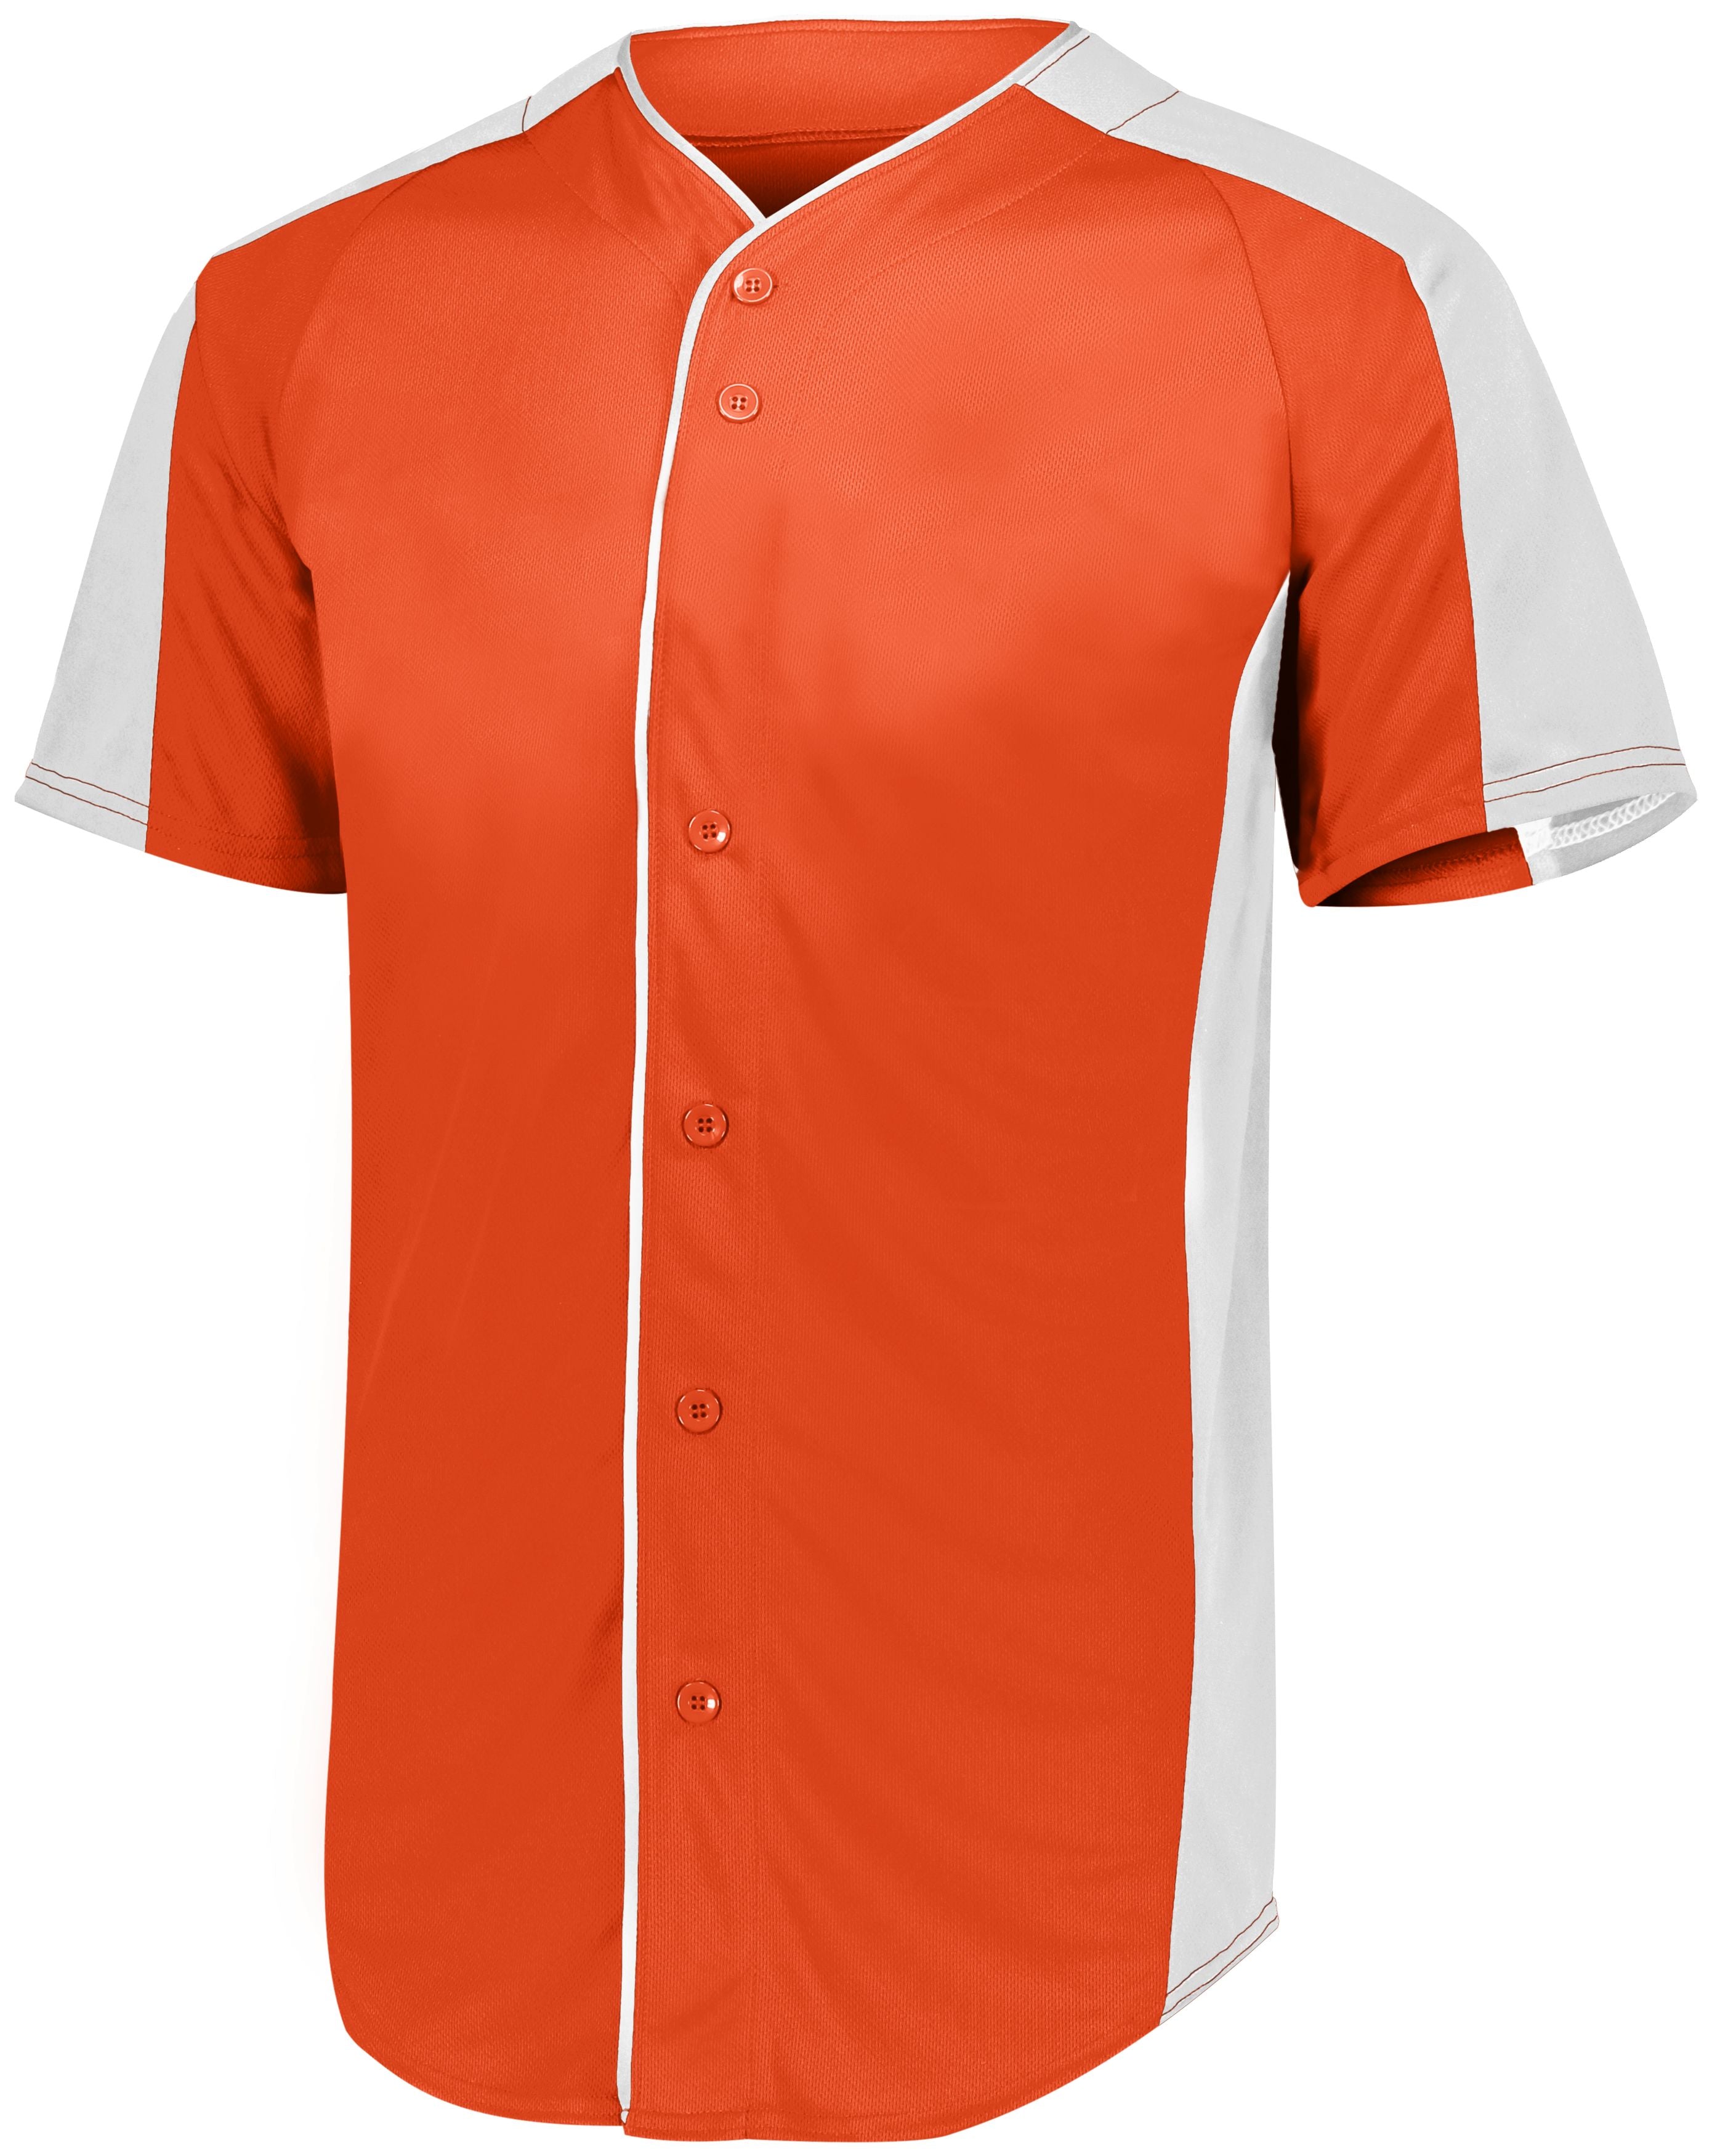 Augusta Sportswear Youth Full-Button Baseball Jersey in Orange/White  -Part of the Youth, Youth-Jersey, Augusta-Products, Baseball, Shirts, All-Sports, All-Sports-1 product lines at KanaleyCreations.com